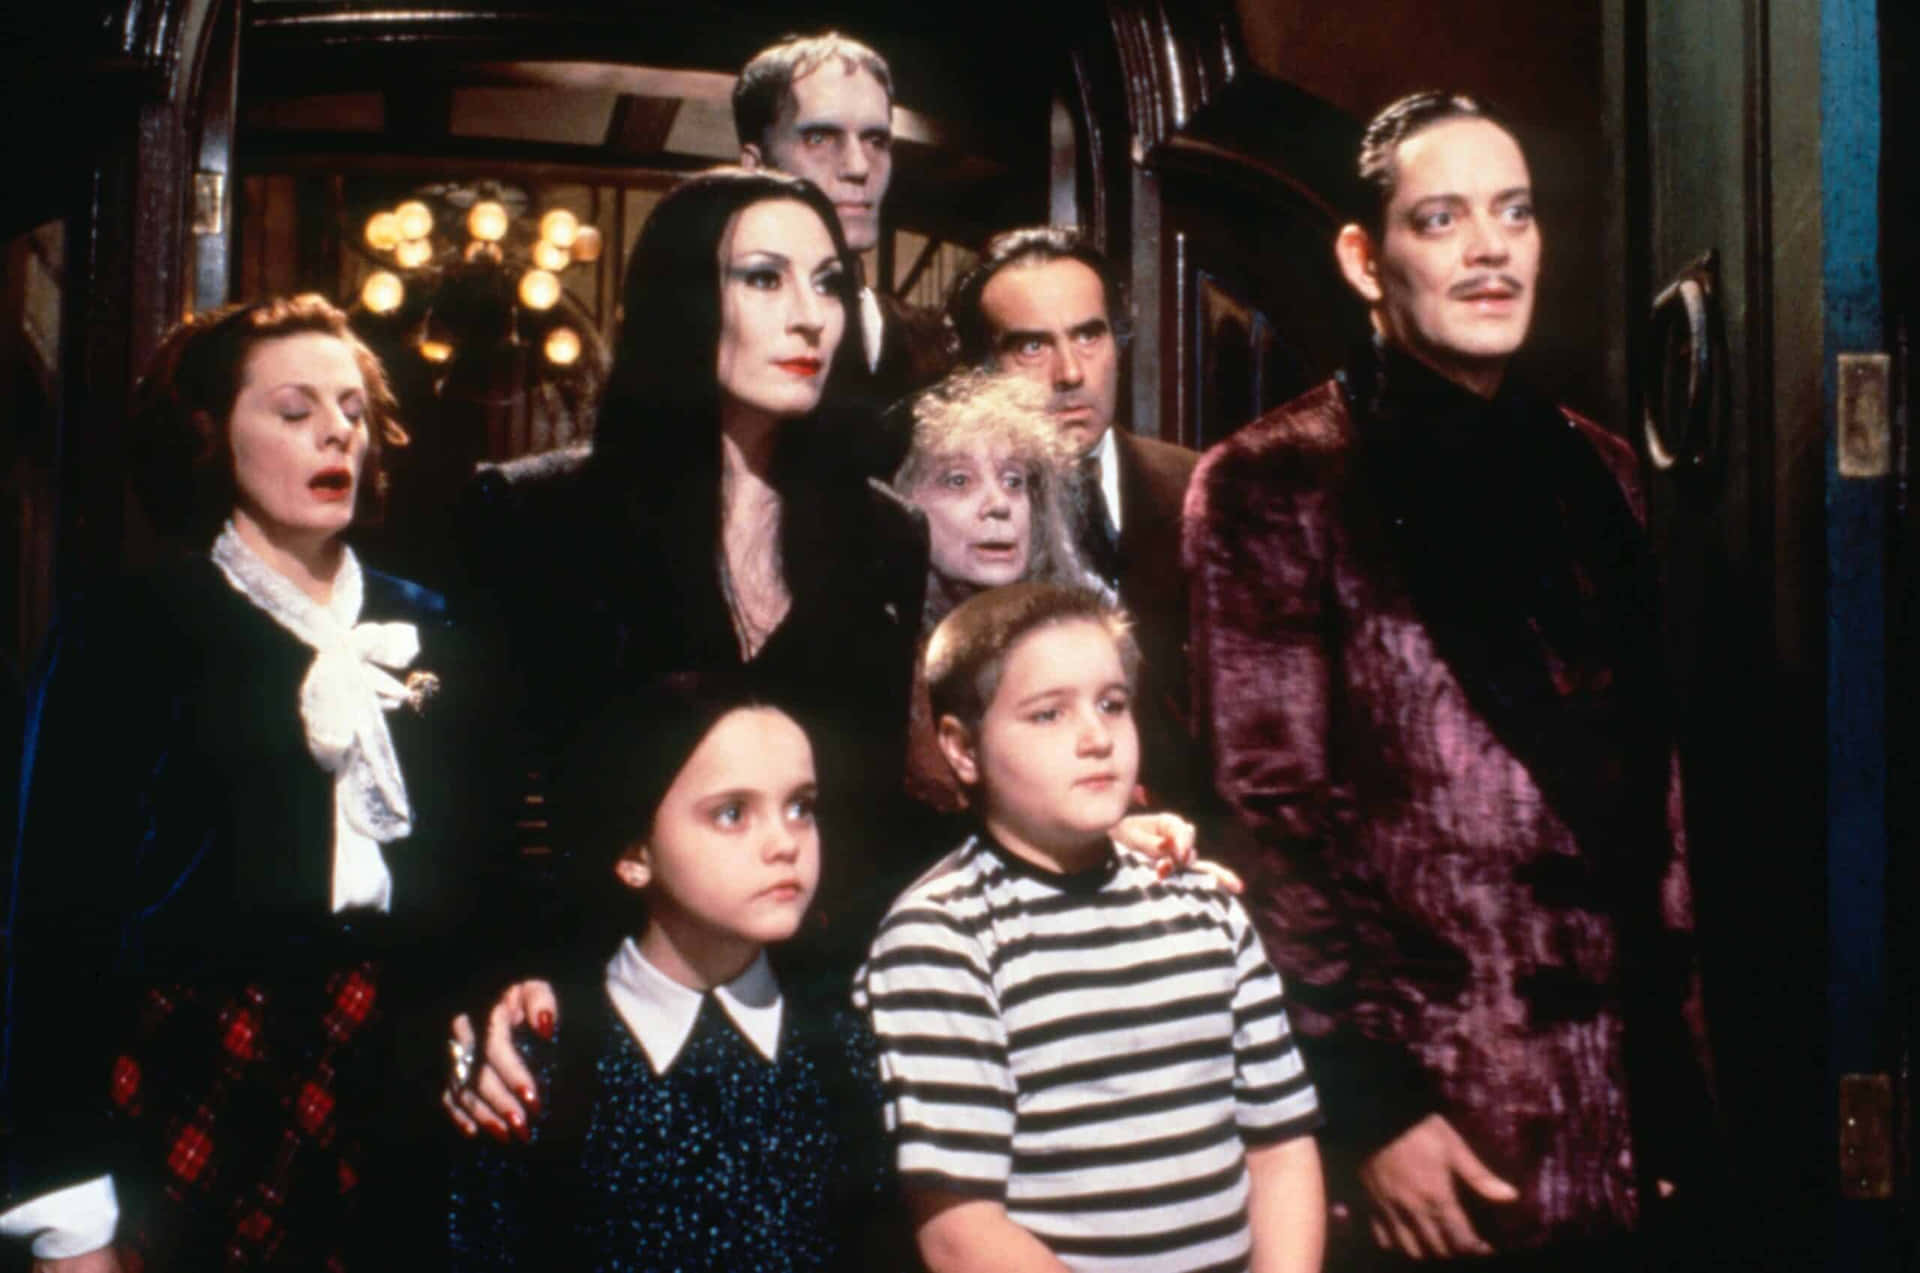 The Lovable Addams Family